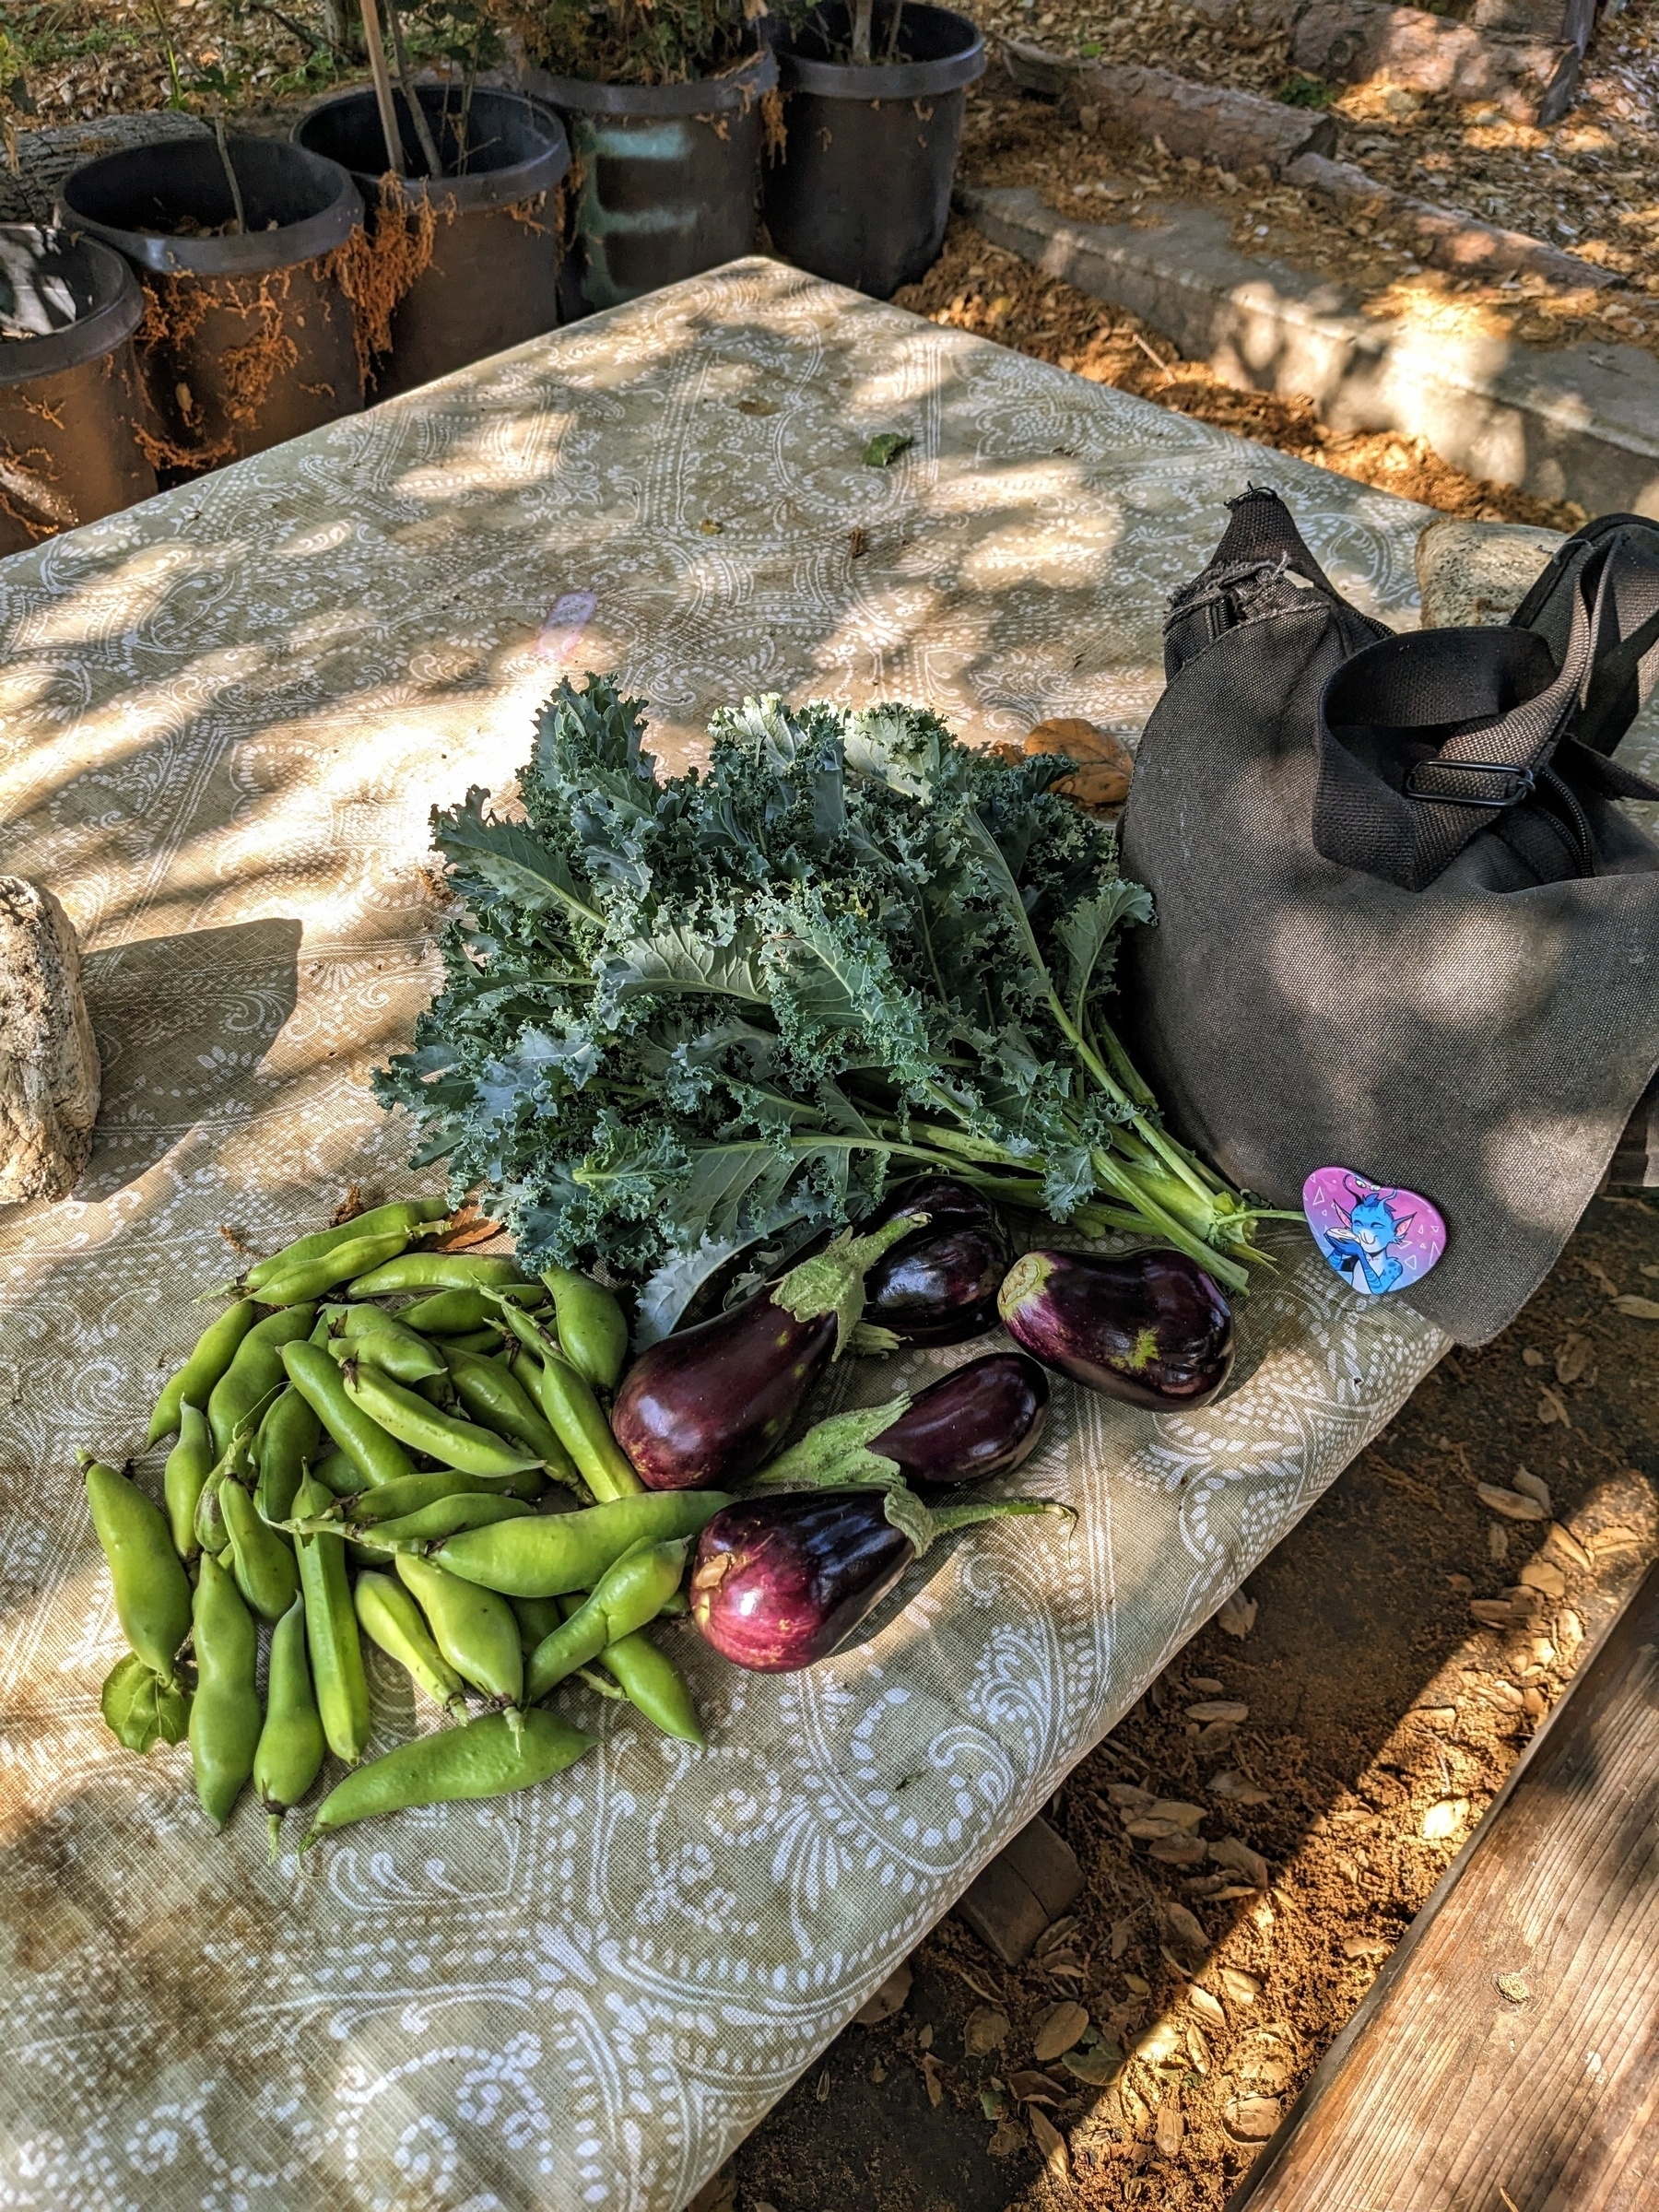 A photo of a picnic table with a beige and white table cloth on it. The table cloth is dirty from tree debris. On the table sits a pile of fava beans next to five small globe-type eggplants and a mound of kale. A small black canvas messenger style bag sits nearby. Shadows of the oak trees above cover the entire scene.